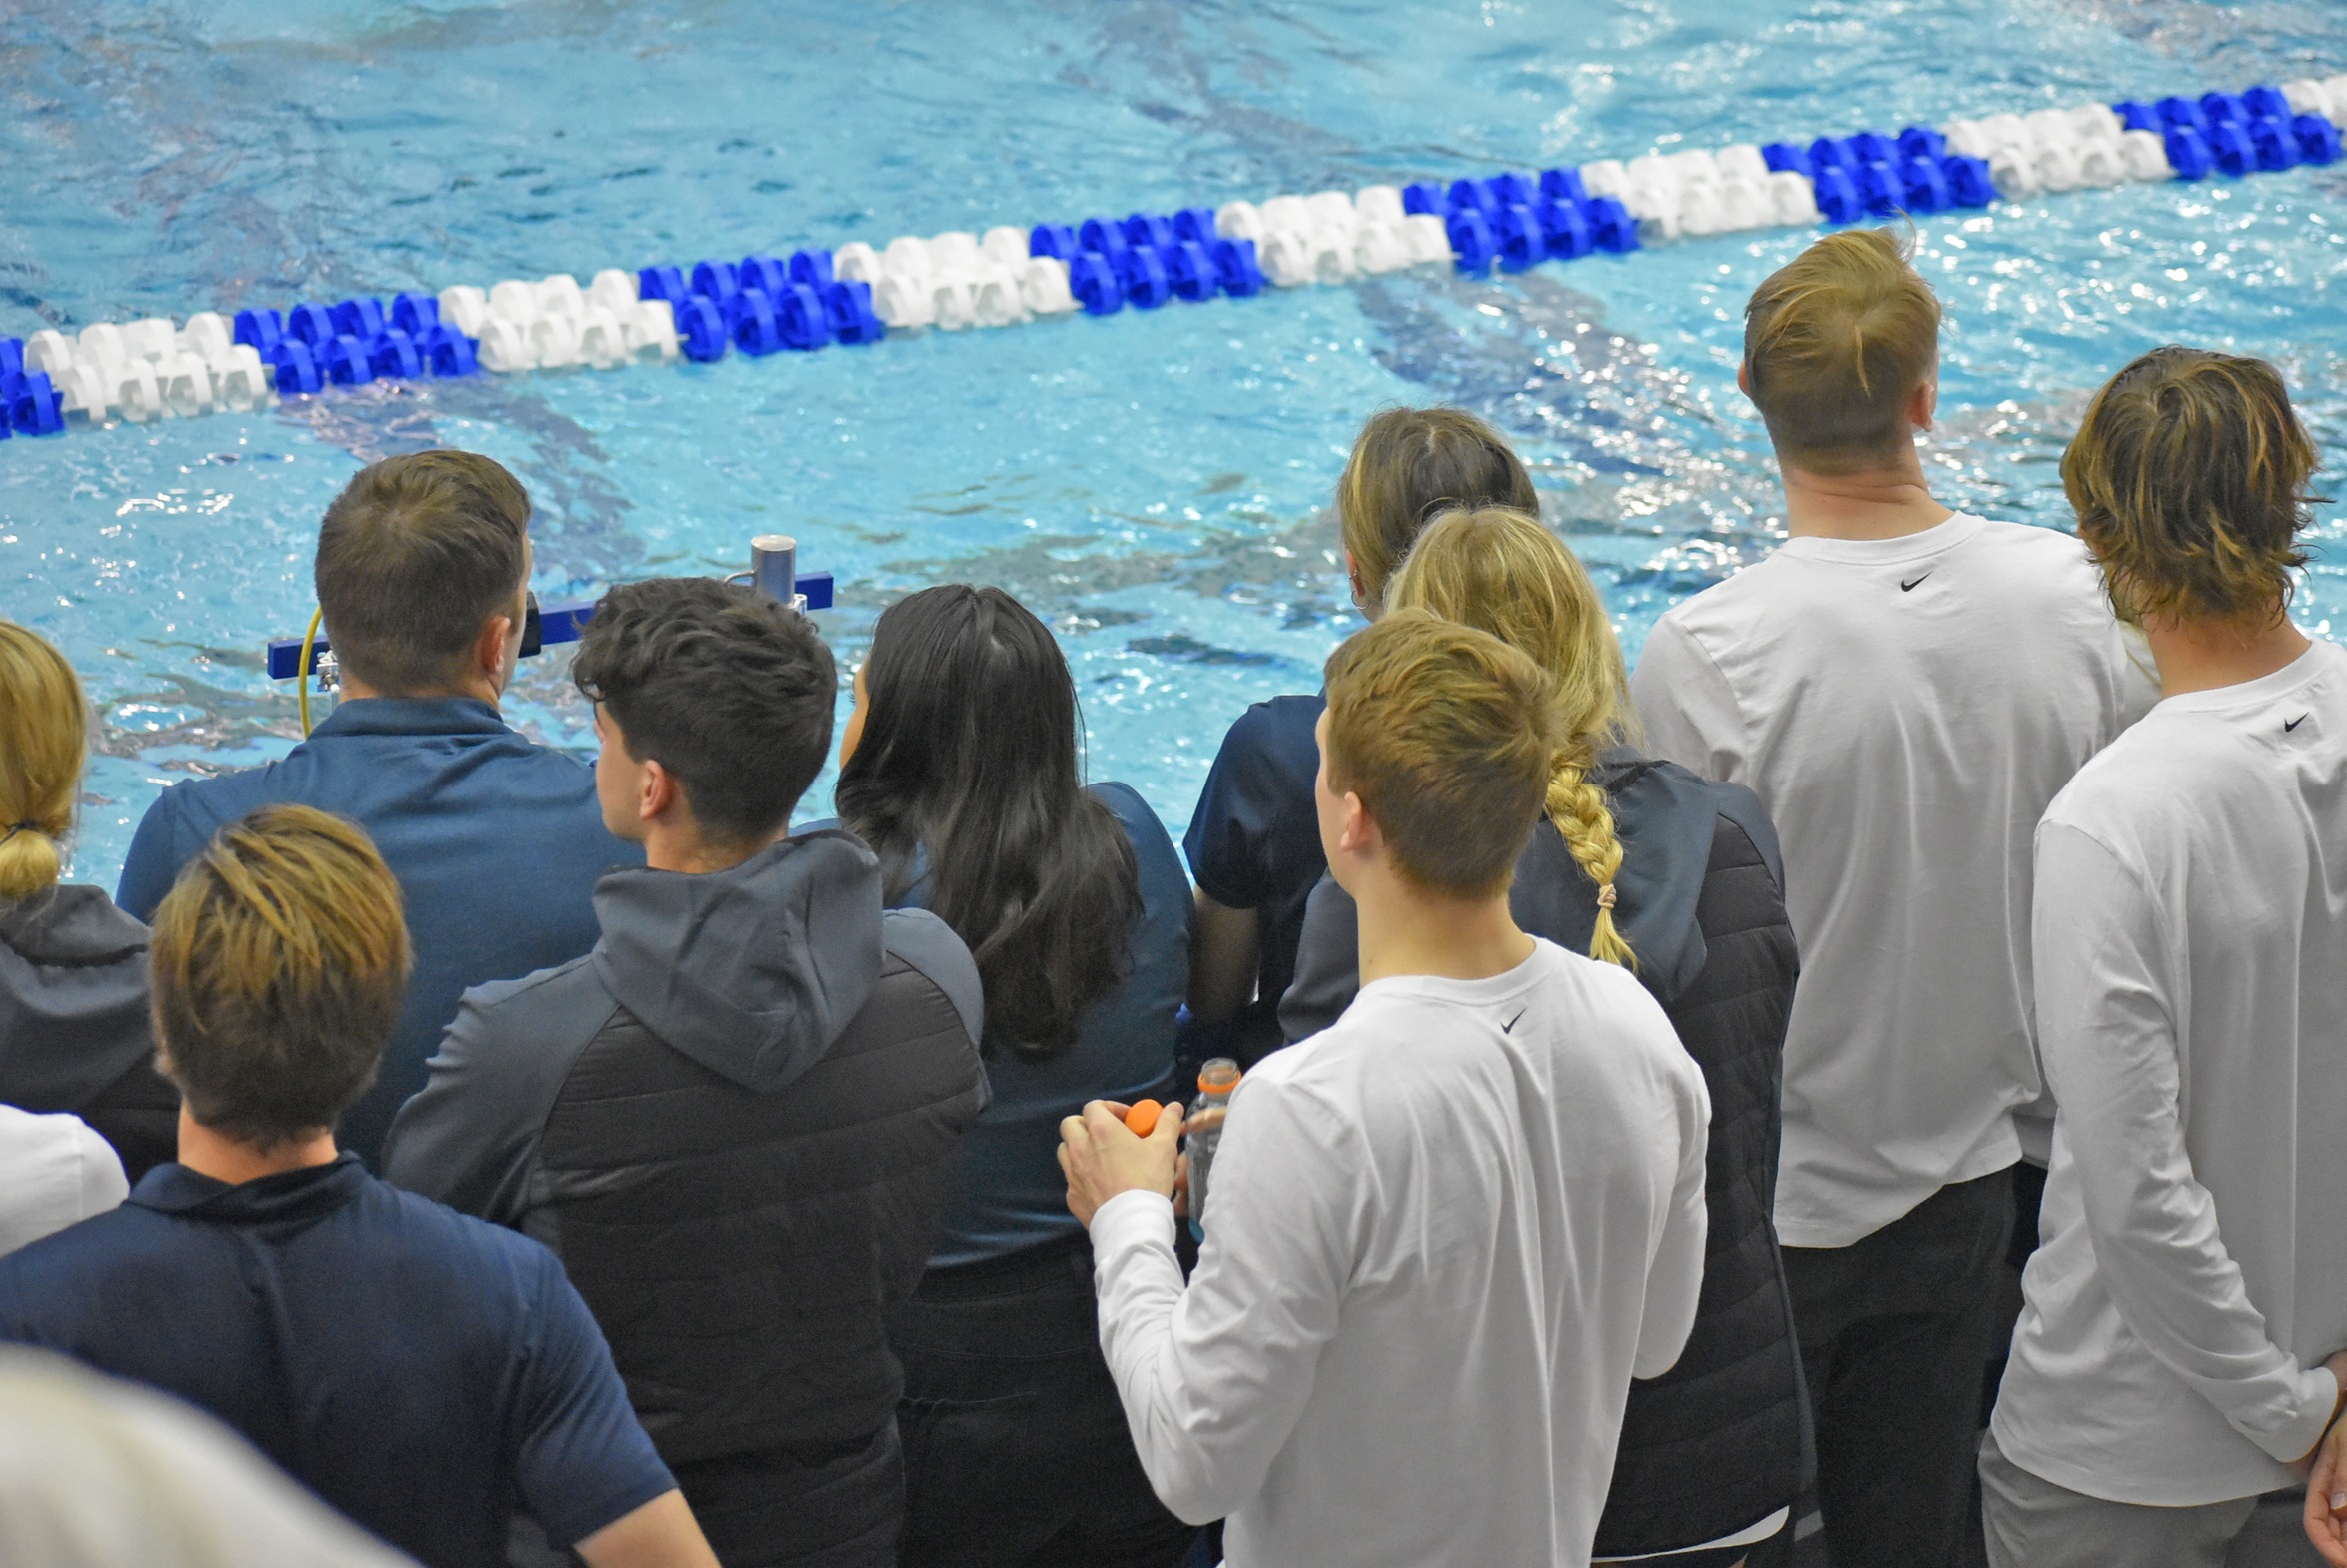 Eagles named to CSCAA Scholar All-America Team